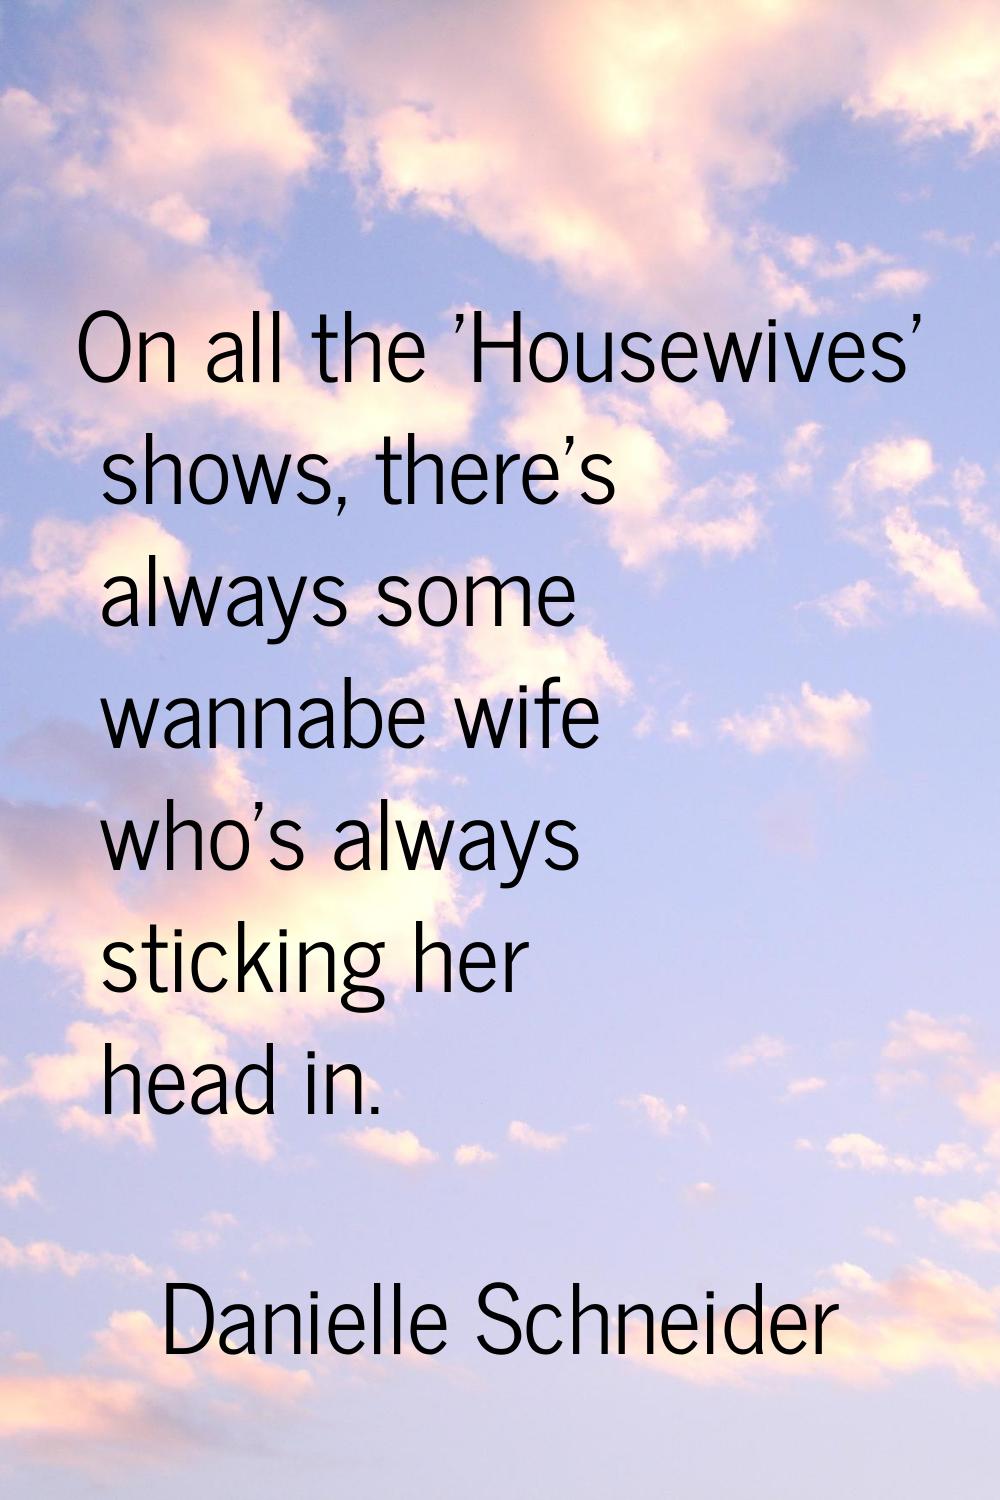 On all the 'Housewives' shows, there's always some wannabe wife who's always sticking her head in.